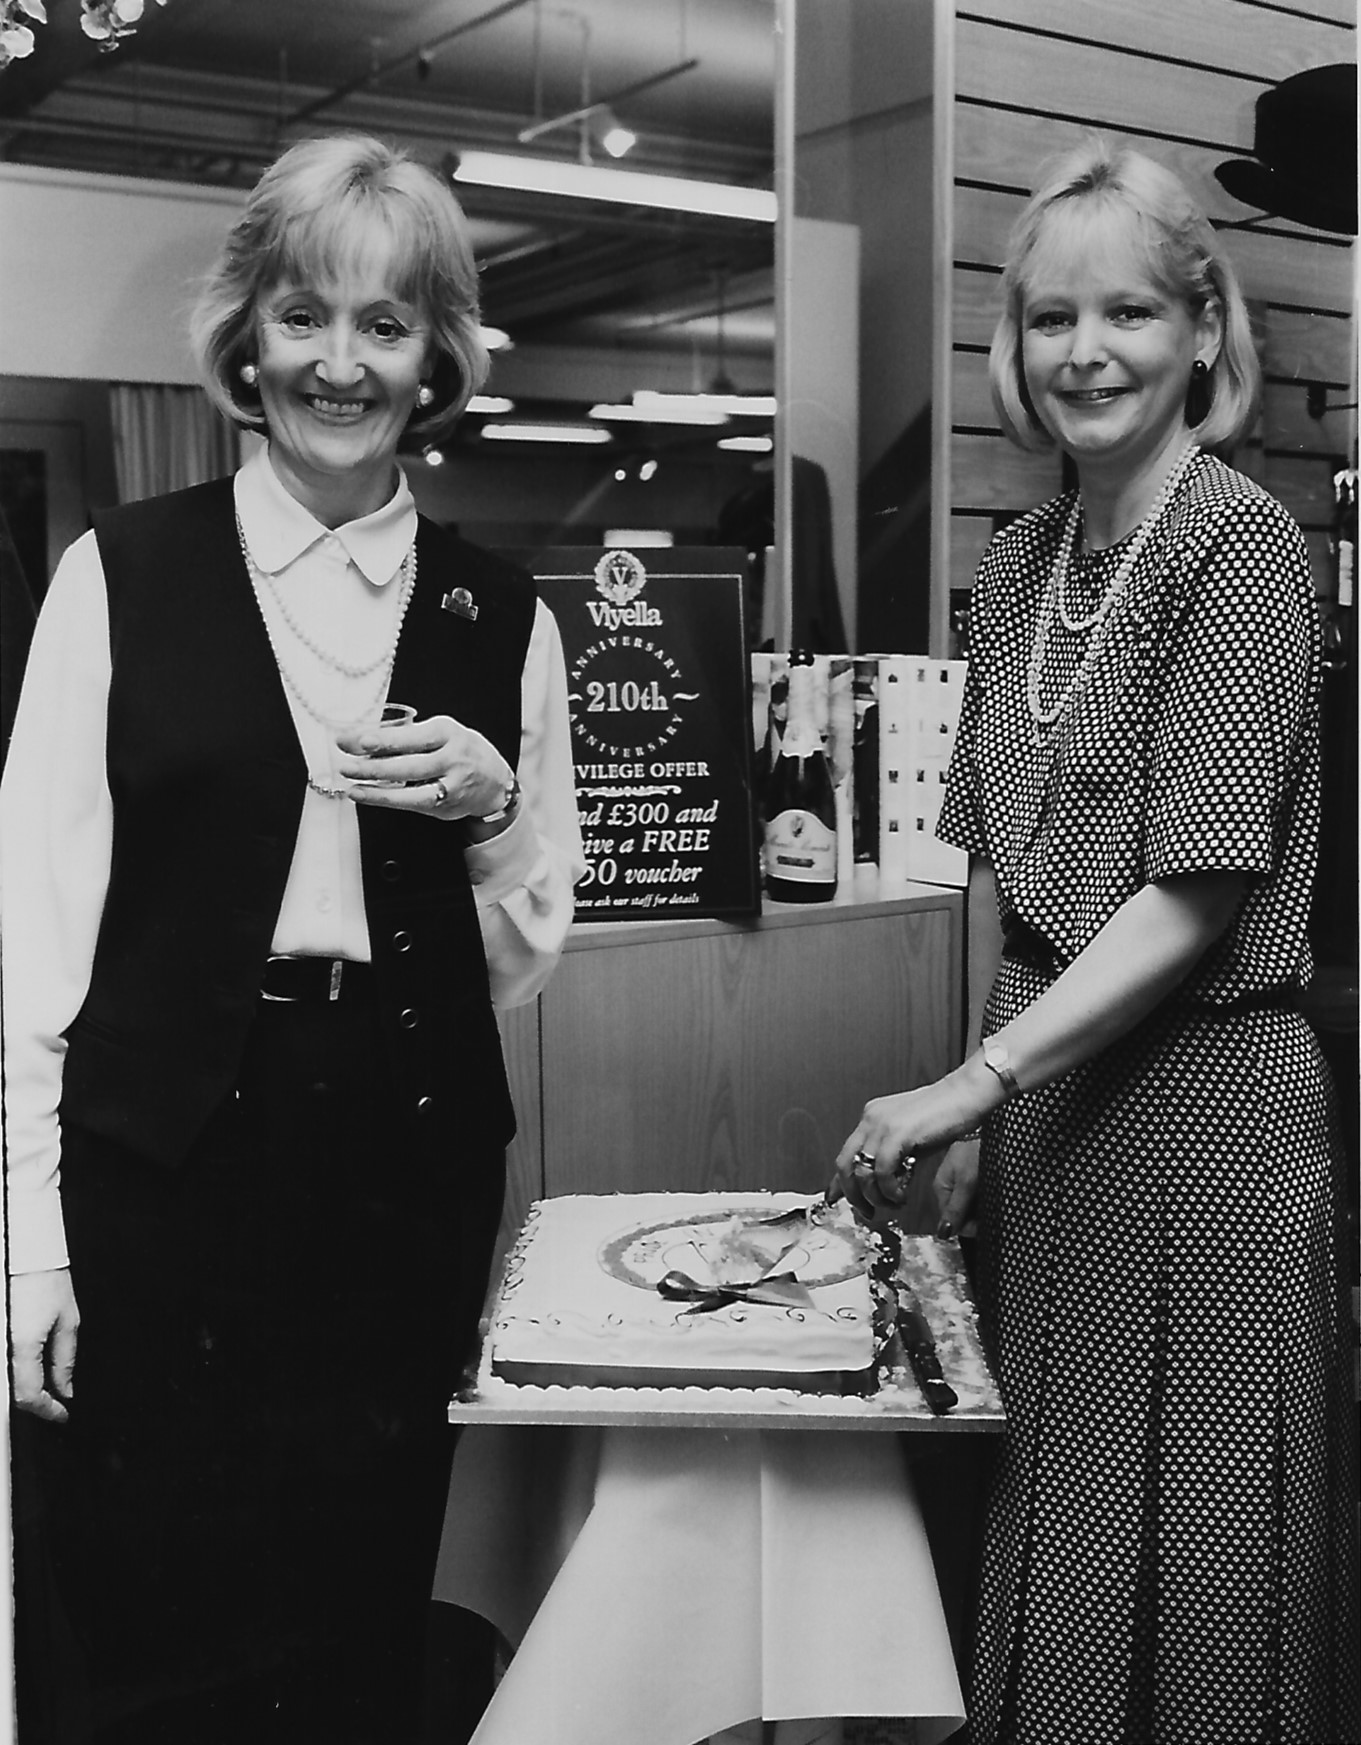 Southport in November 1994. These two colleagues celebrates the 210th Viyella anniversary with some cake